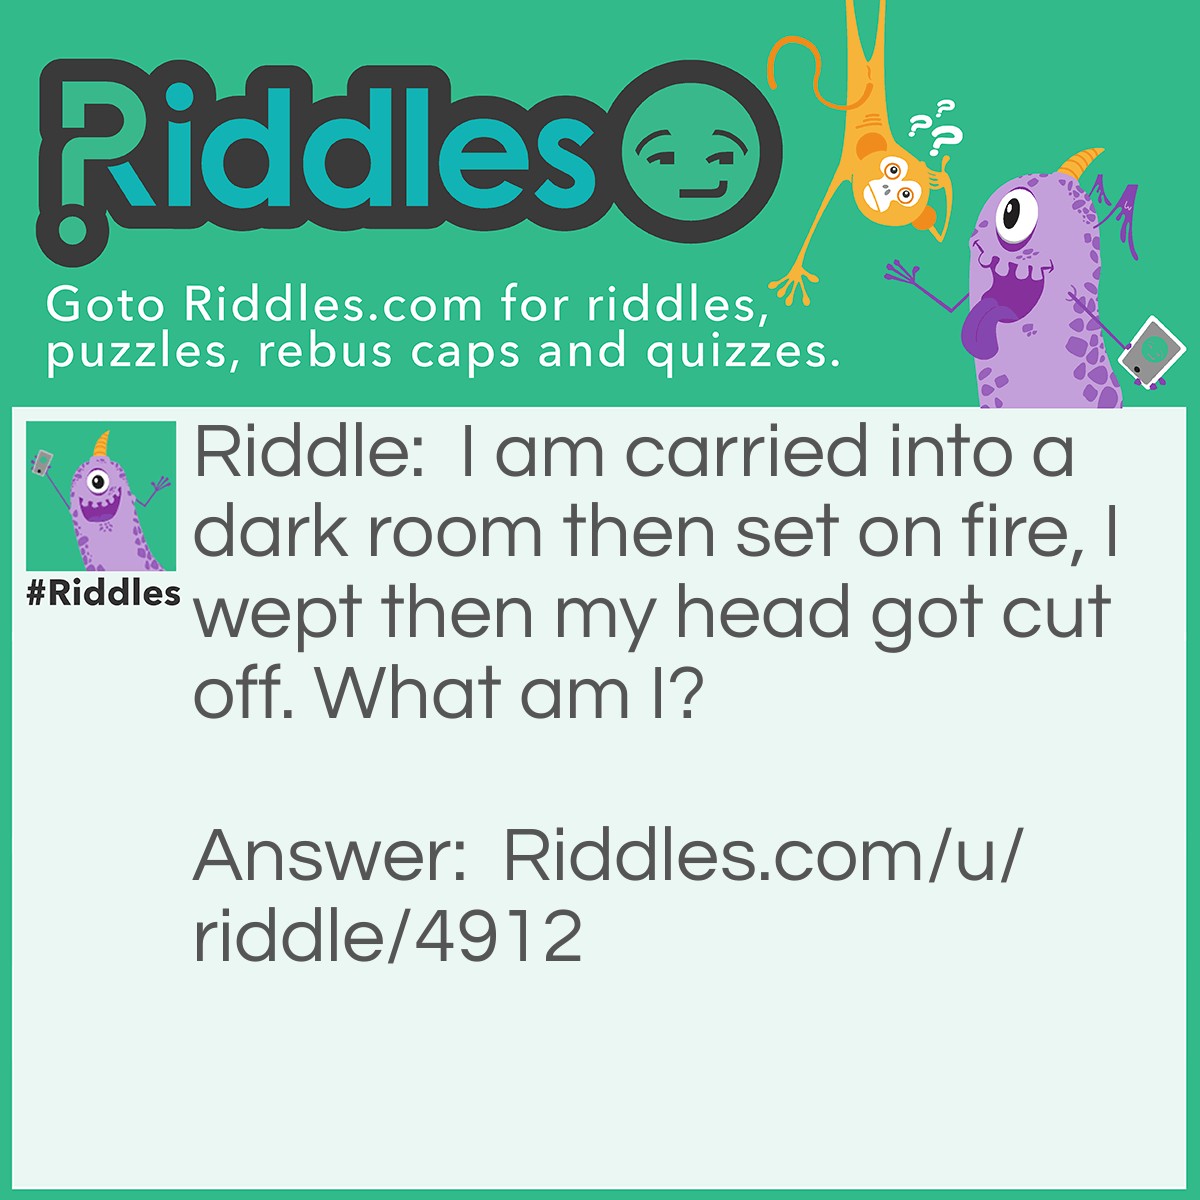 Riddle: I am carried into a dark room then set on fire, I wept then my head got cut off. What am I? Answer: I am a candle.